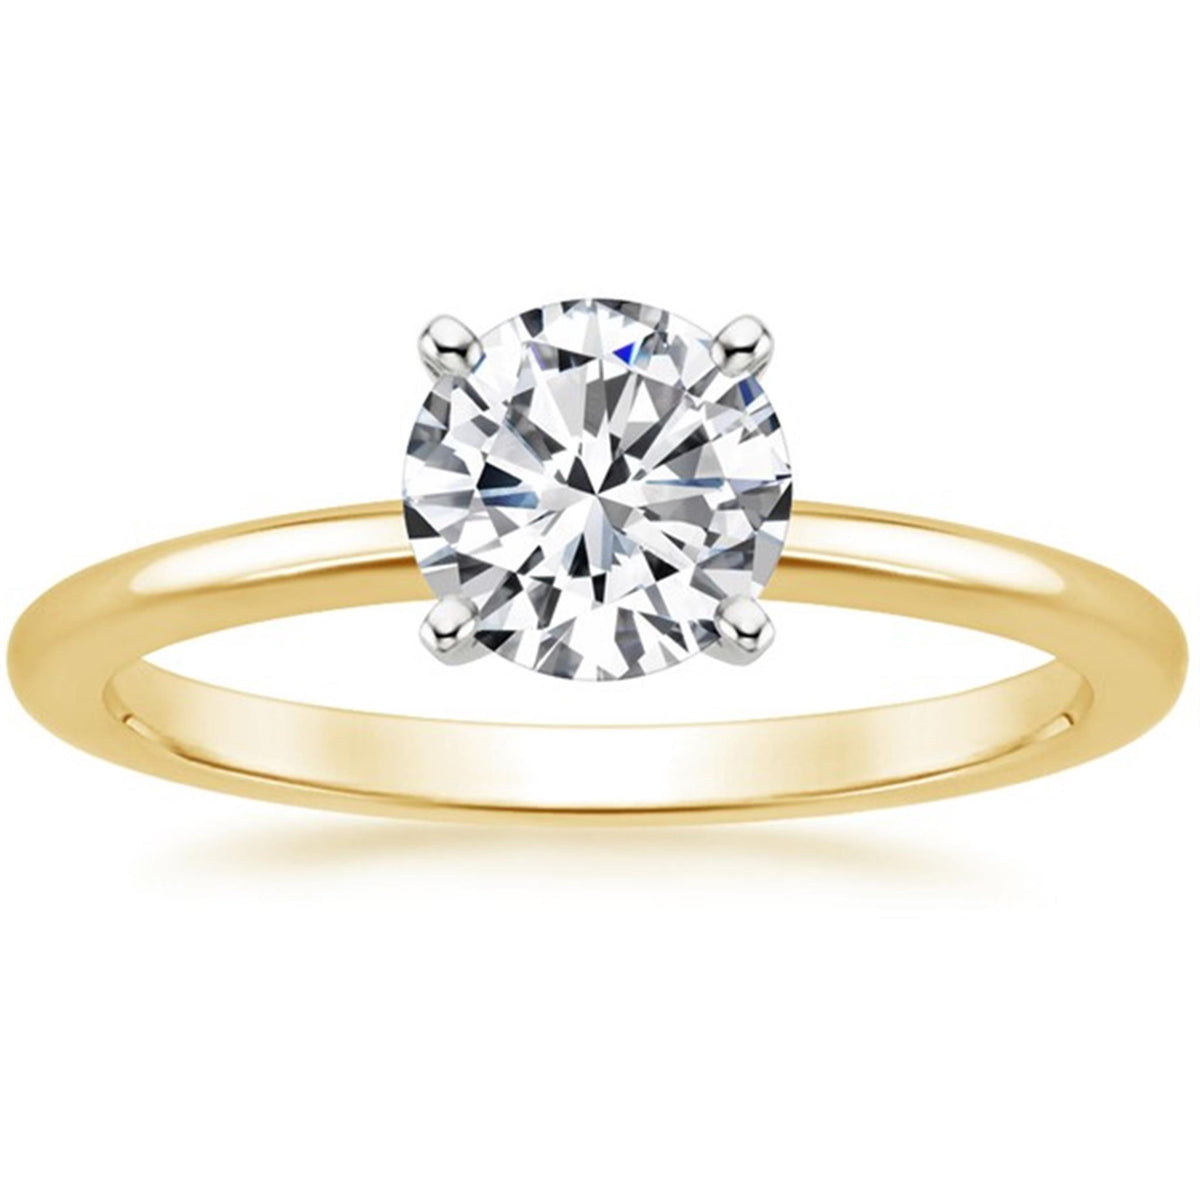 14Kt Yellow Gold Solitaire Ring With 1.01ct Round Natural Center Diamond